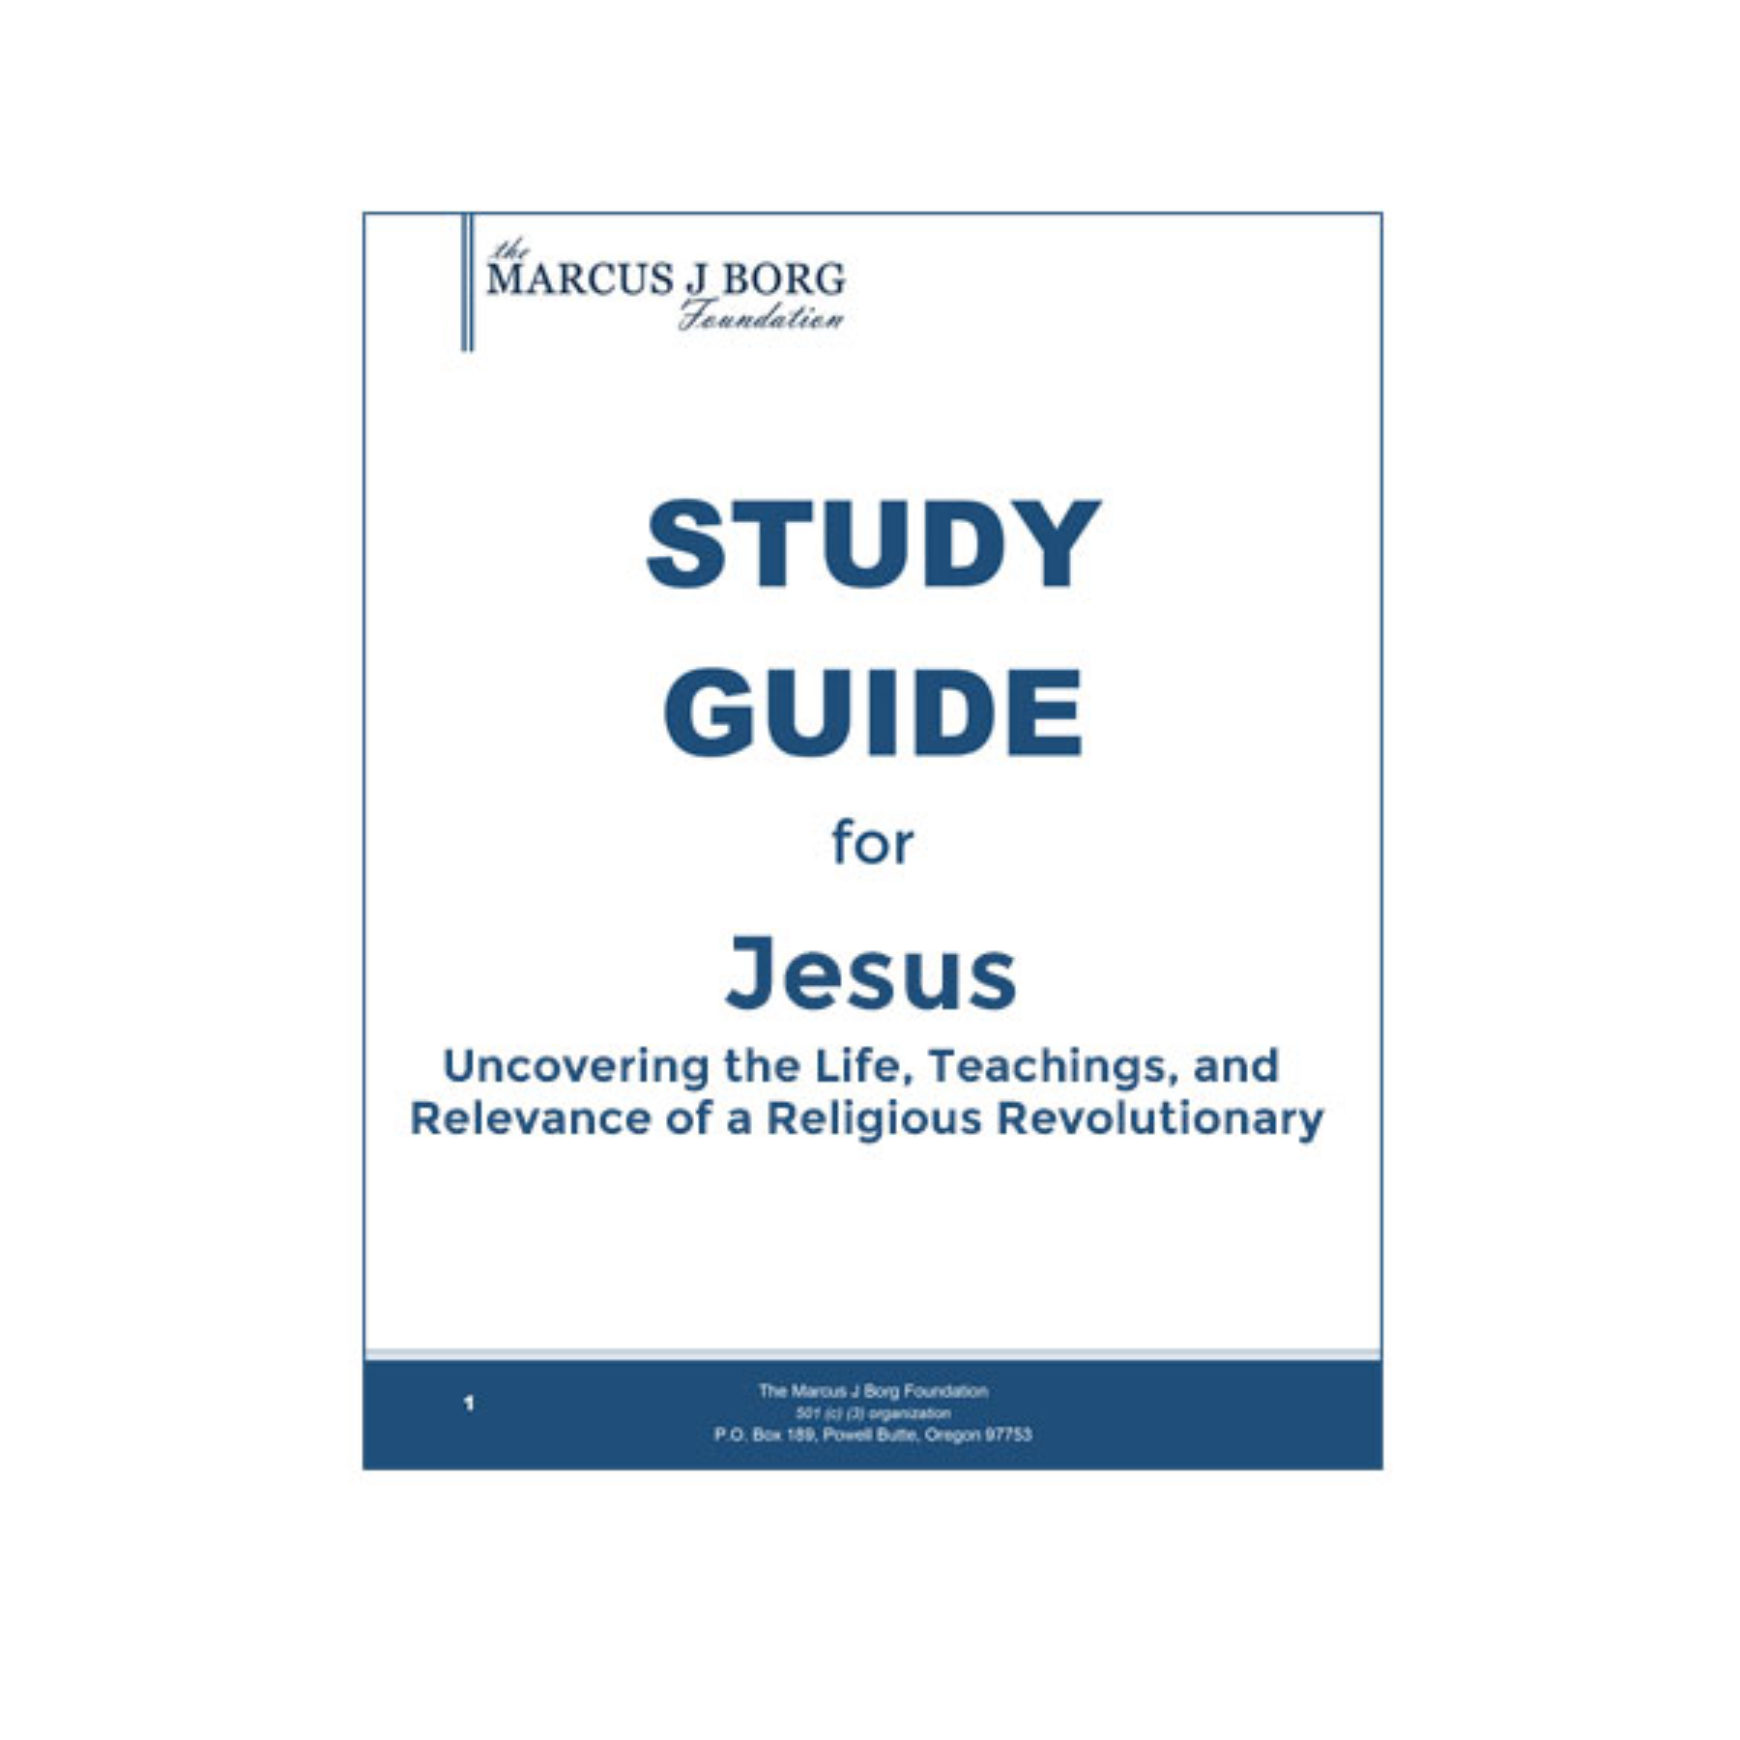 Jesus Uncovering The Life Teachings And Relevance Of A Religious Revolutionary By Marcus J Borg